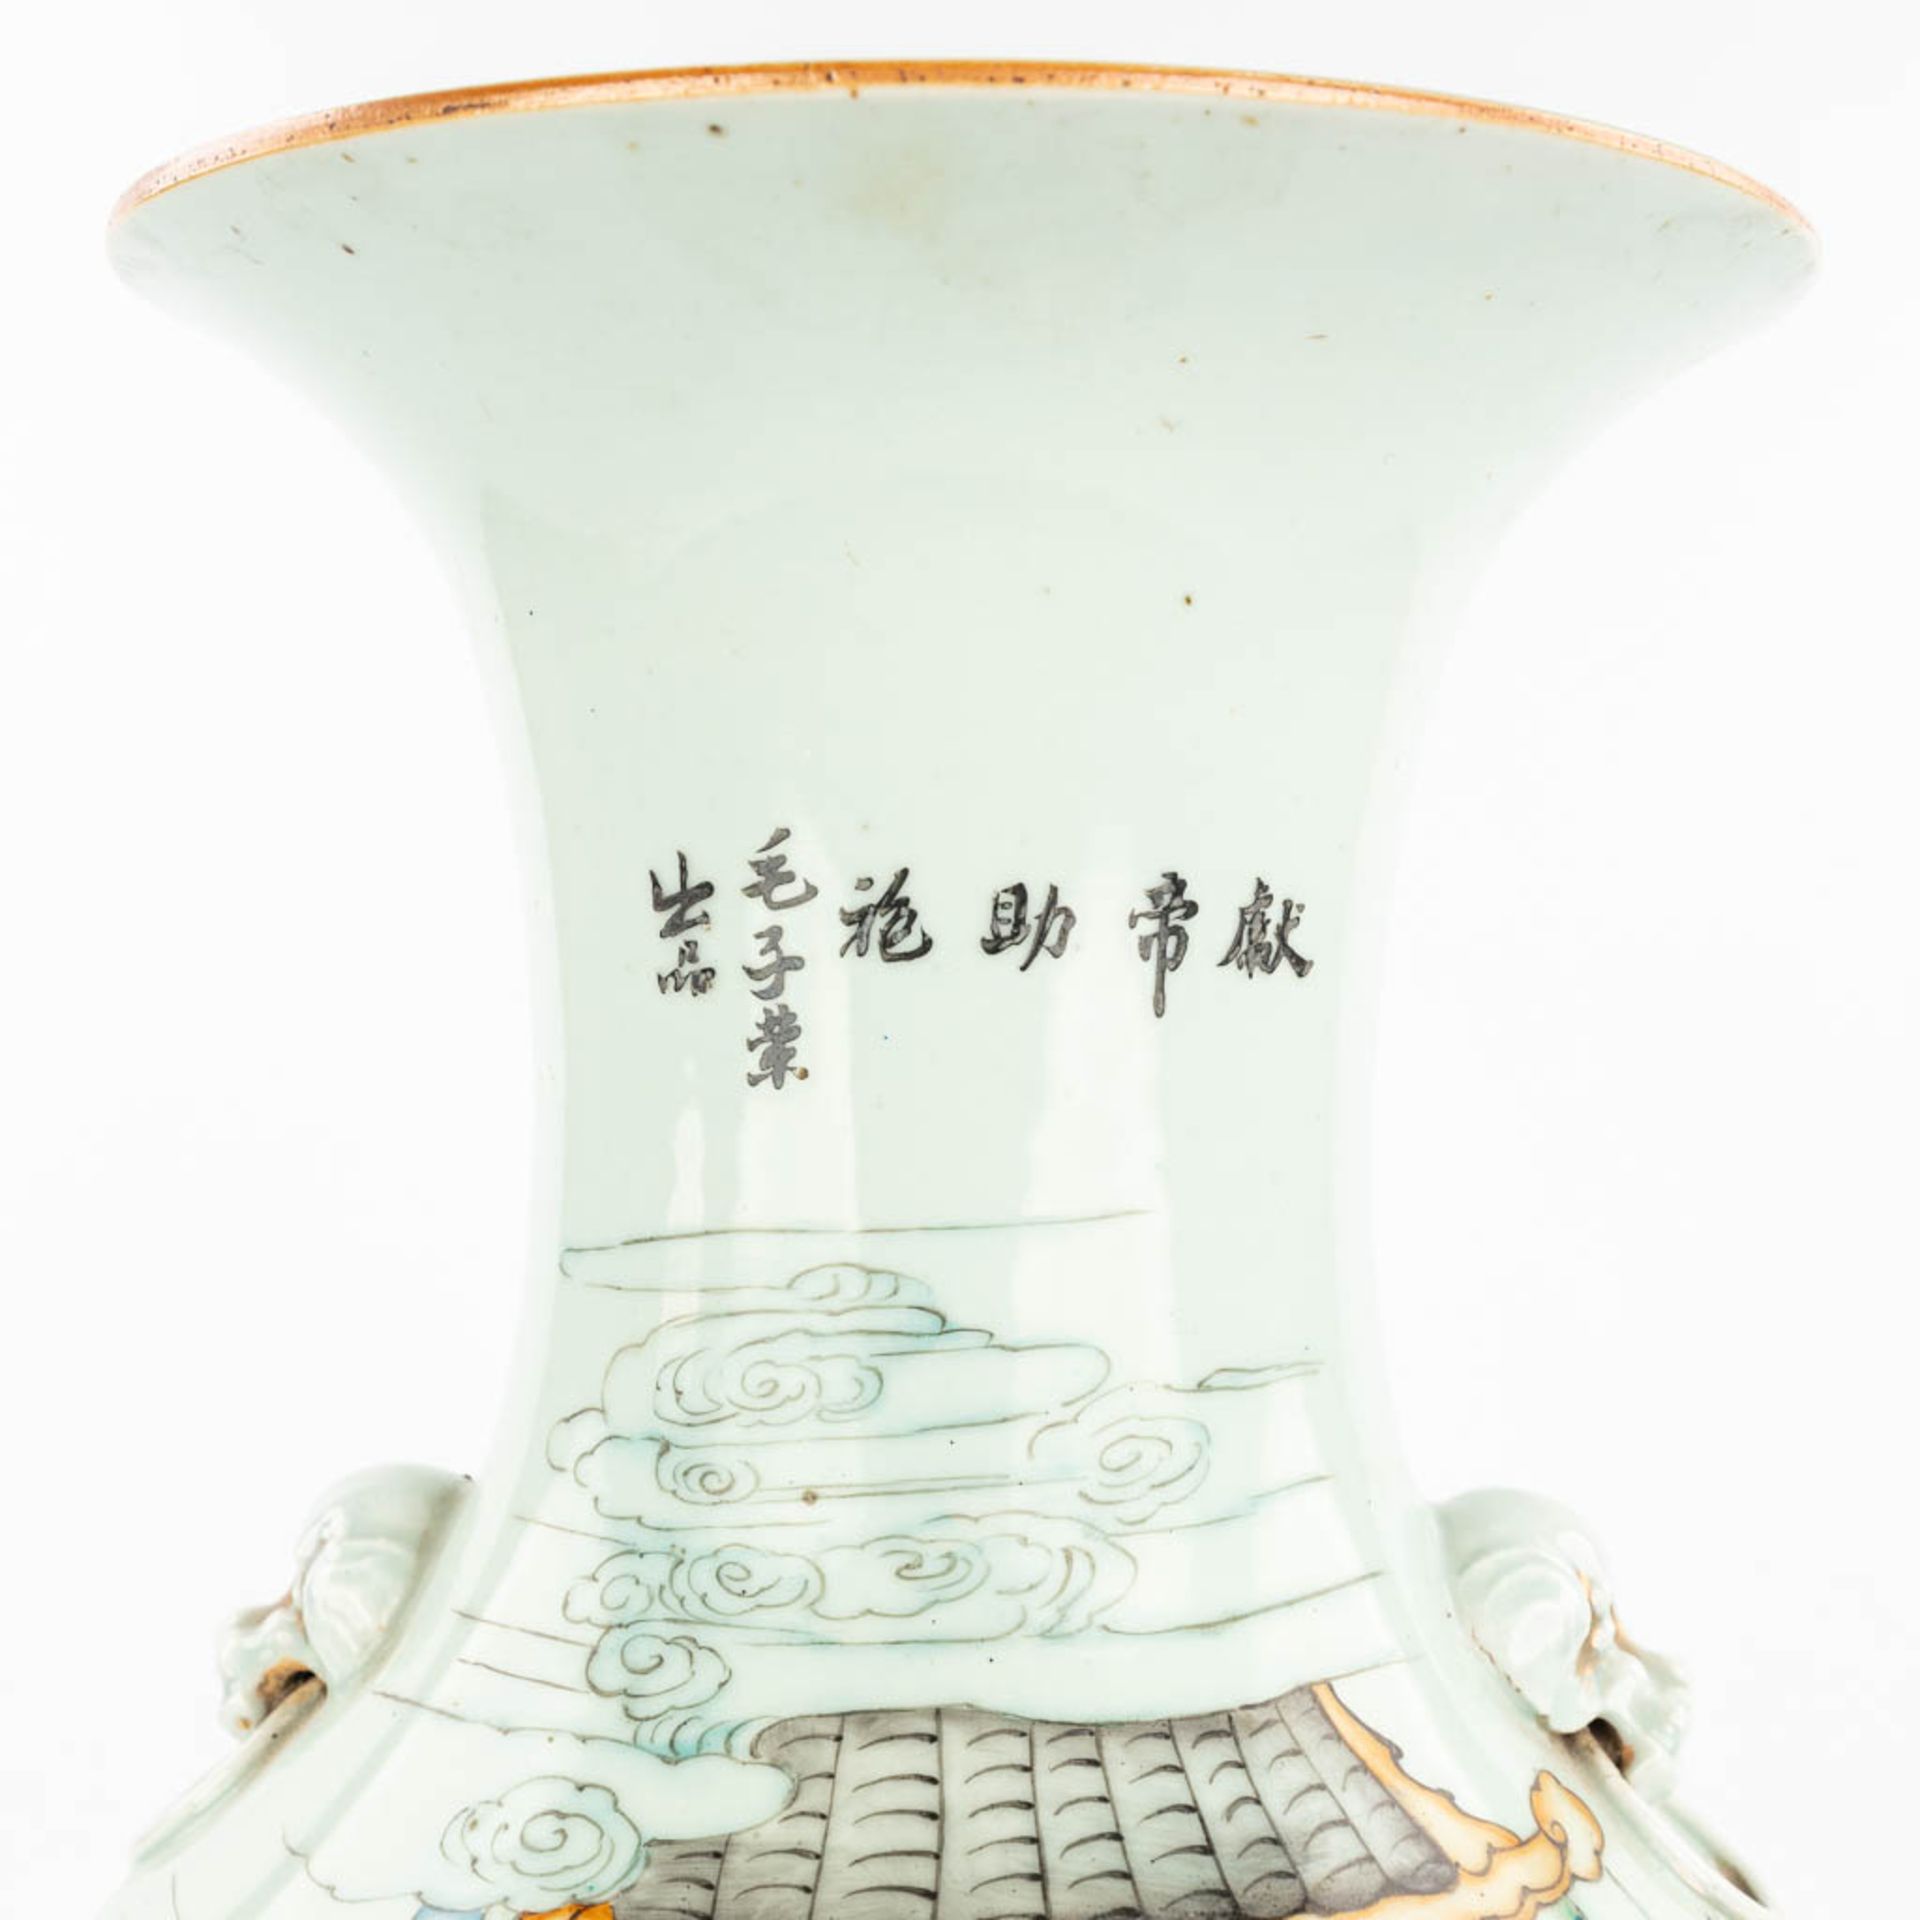 A Chinese vase made of porcelain and decorated with a temple scne and calligraphic texts. (H:57cm) - Image 7 of 12